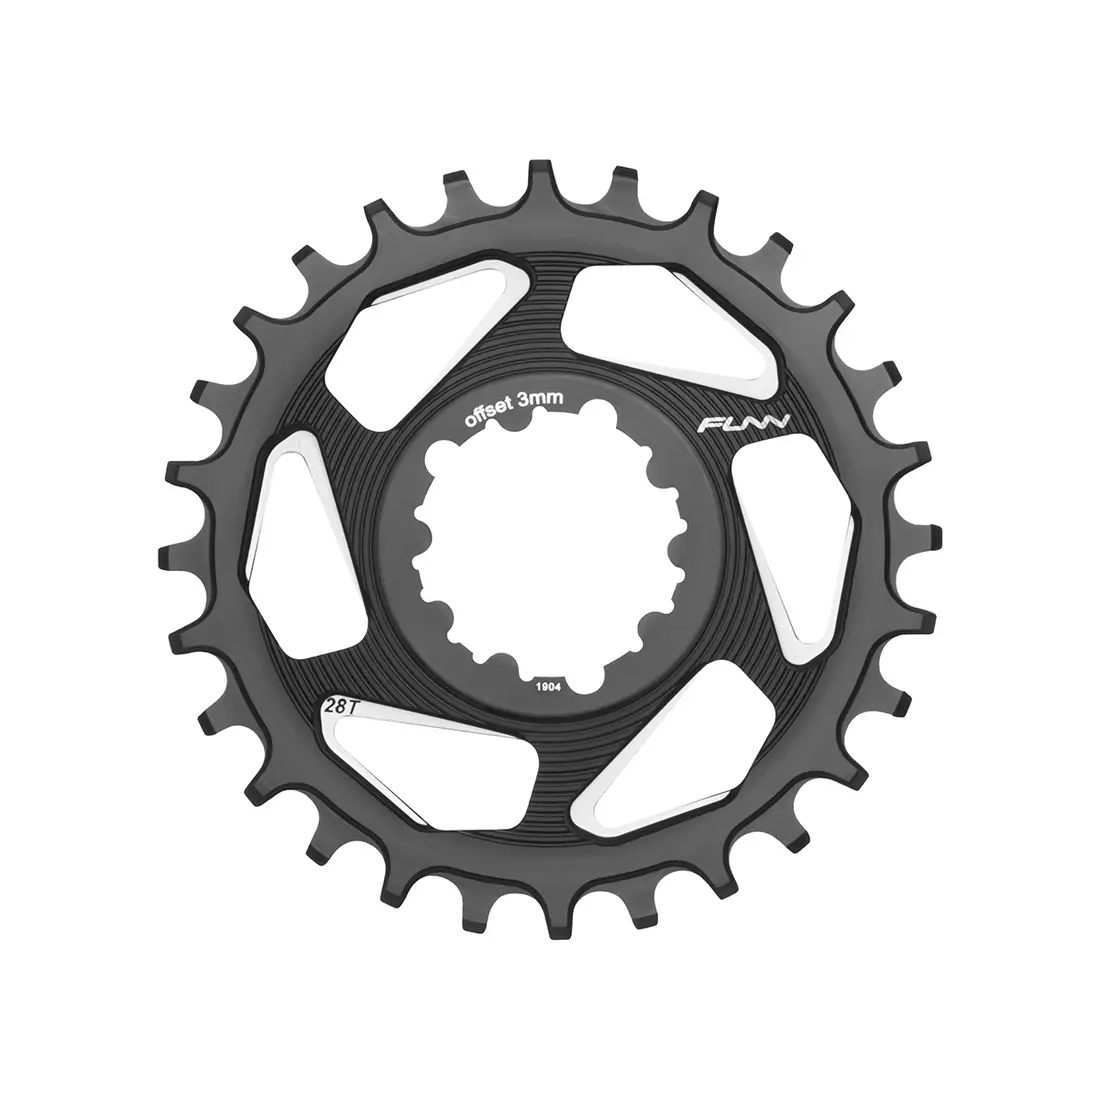 FUNN SOLO DX 34T NARROW- WIDE bicycle sprocket to crank black